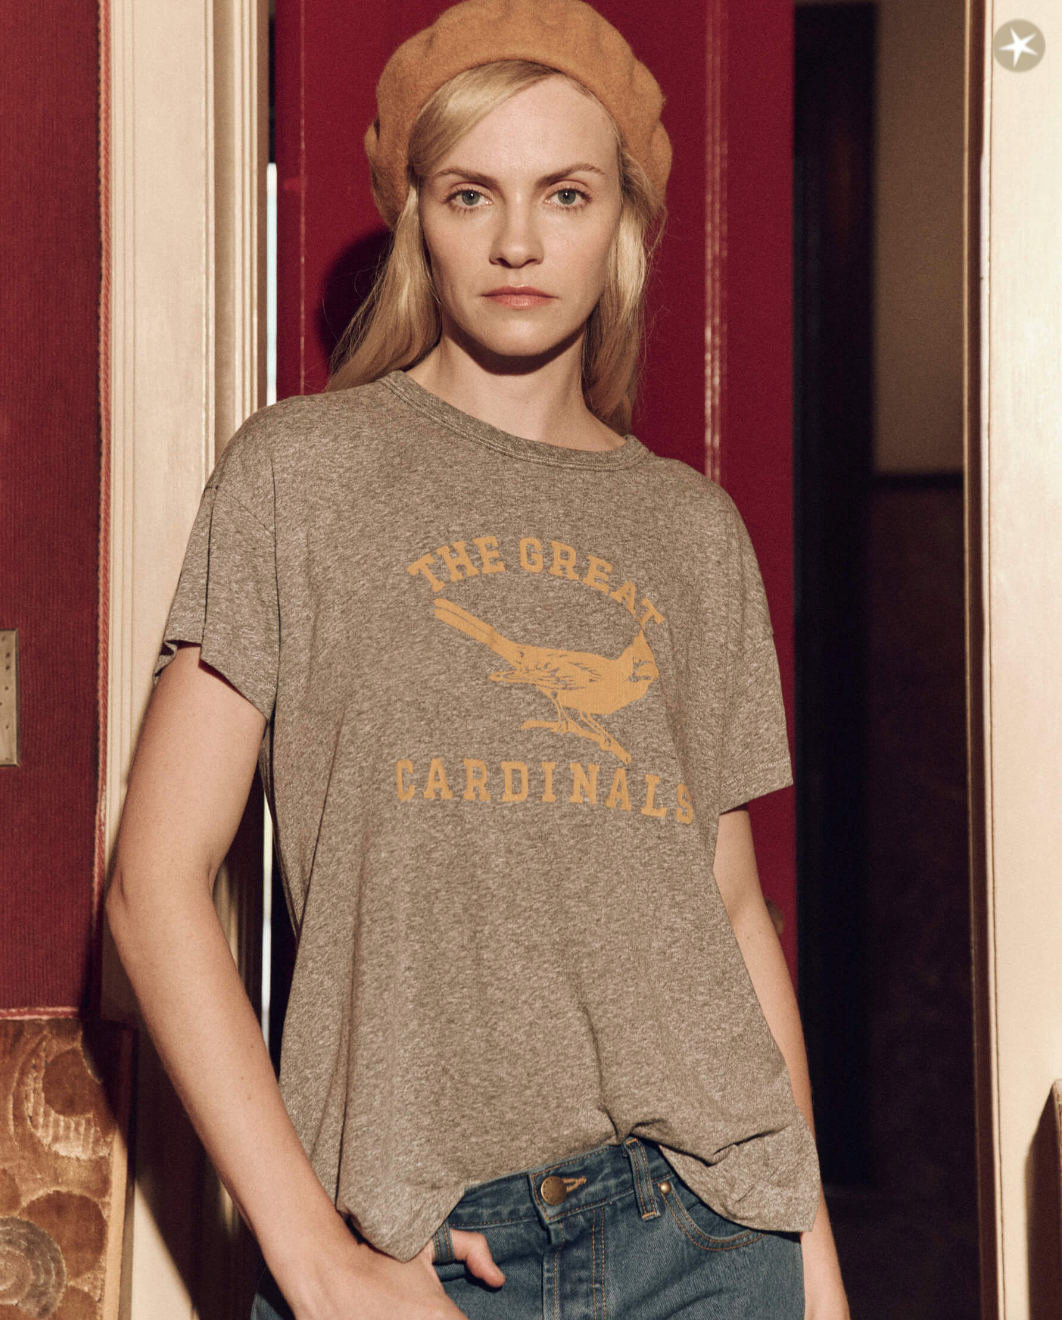 A woman in a grey The Boxy Crew w/ Perched Cardinal t-shirt from The Great Inc. with a bird illustration, wearing a beige beret, stands in a warm-toned, elegant bungalow.